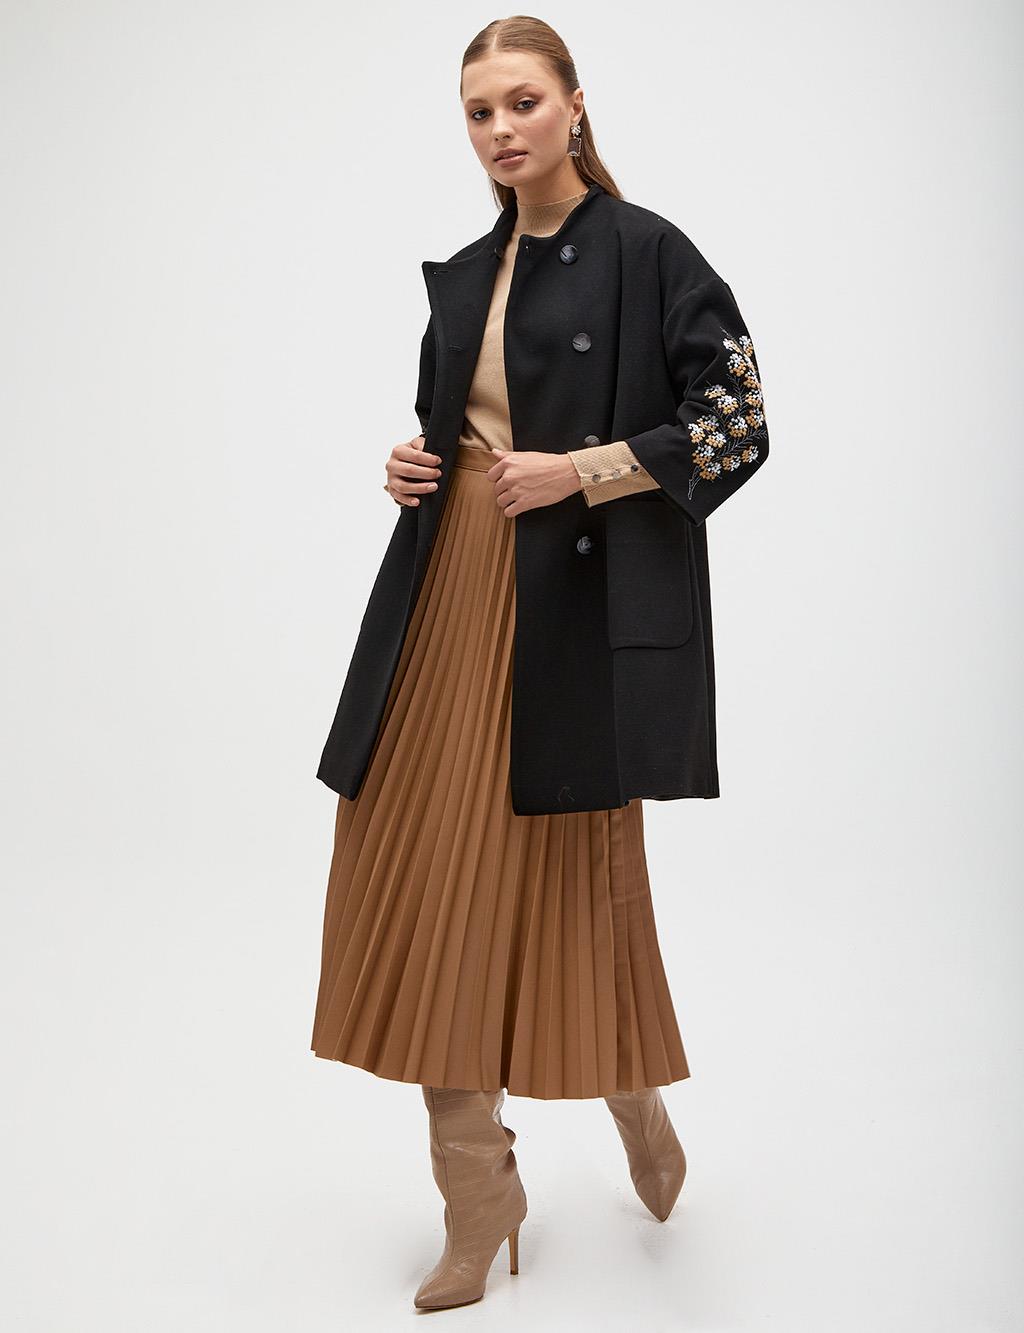 Embroidered Sleeves Coat Black